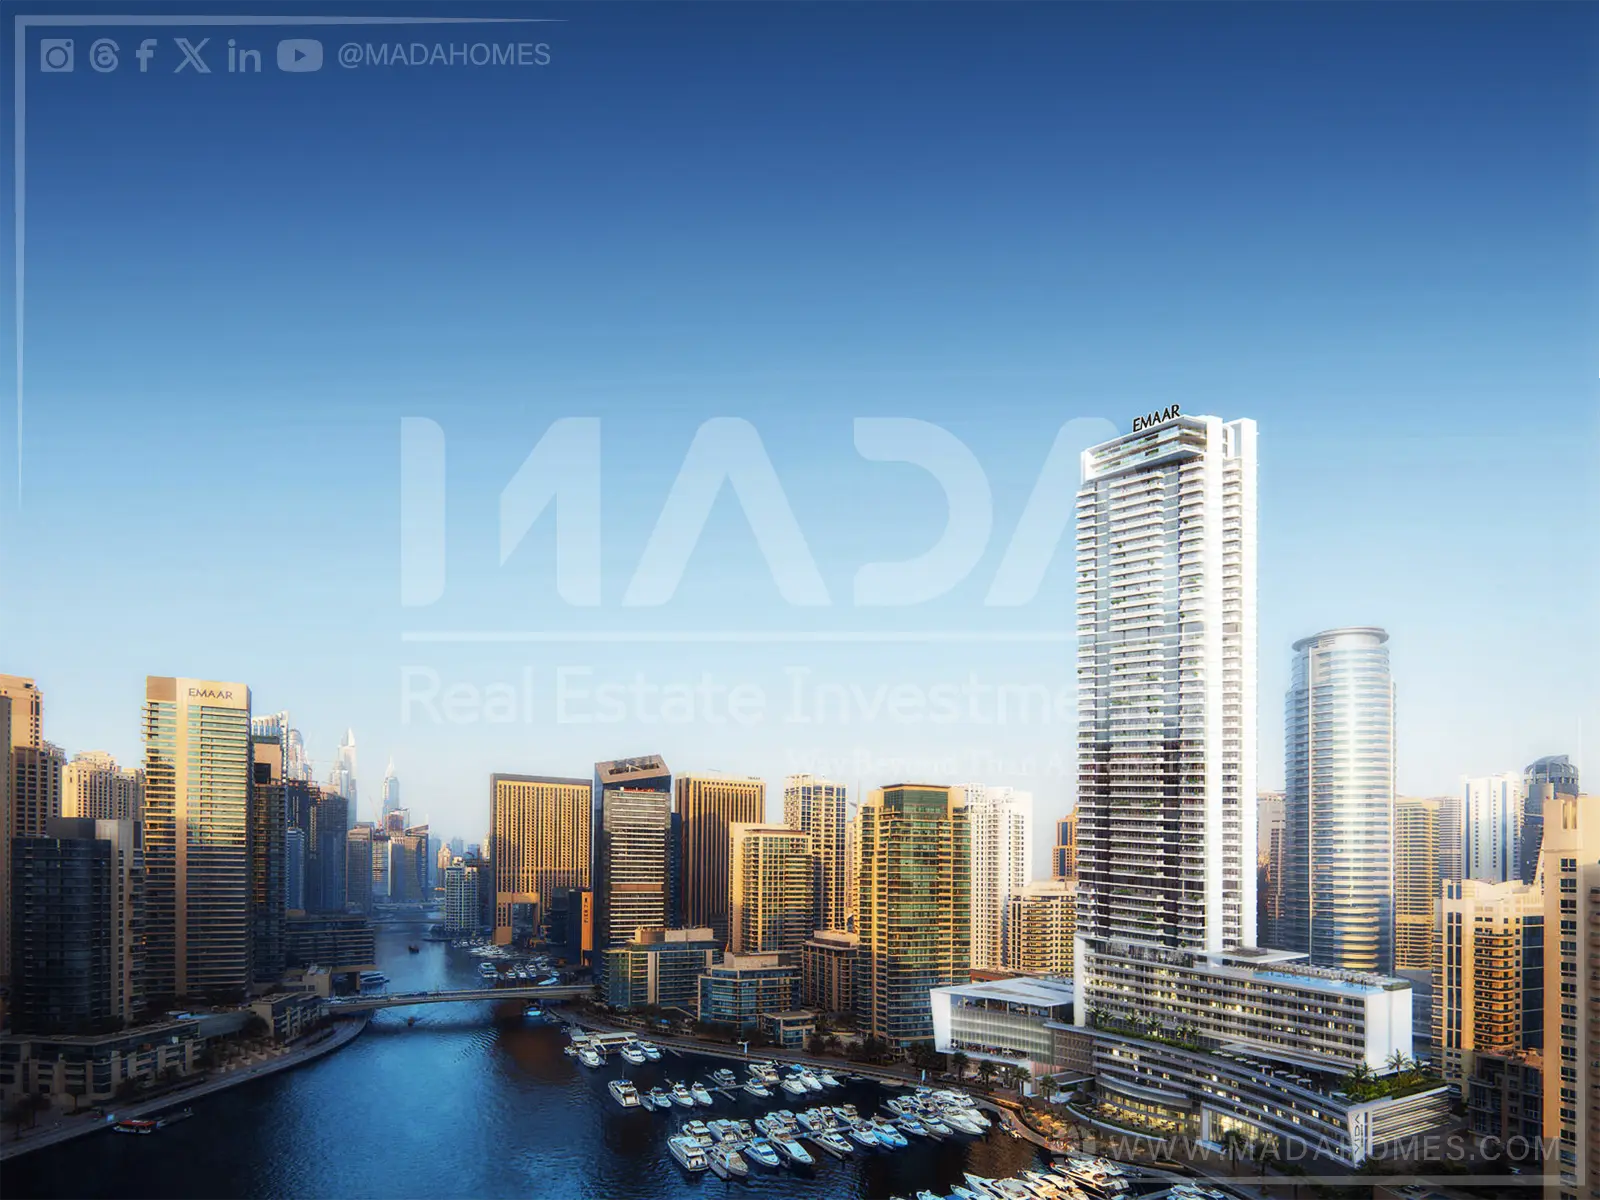 Find out the prices of Emaar Dubai apartments